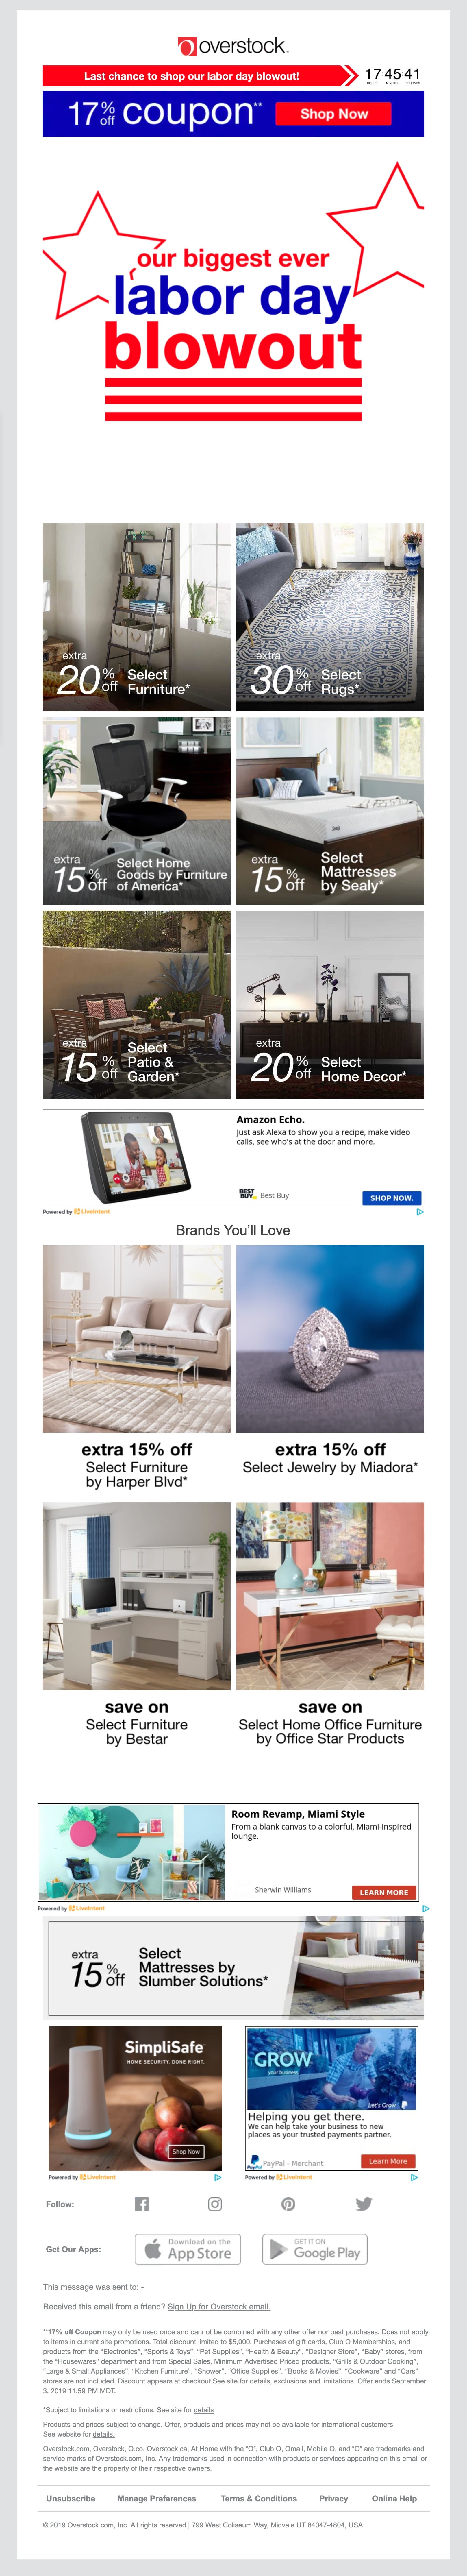 Overstock holiday sales email counts down the days left to shop before a big holiday. 